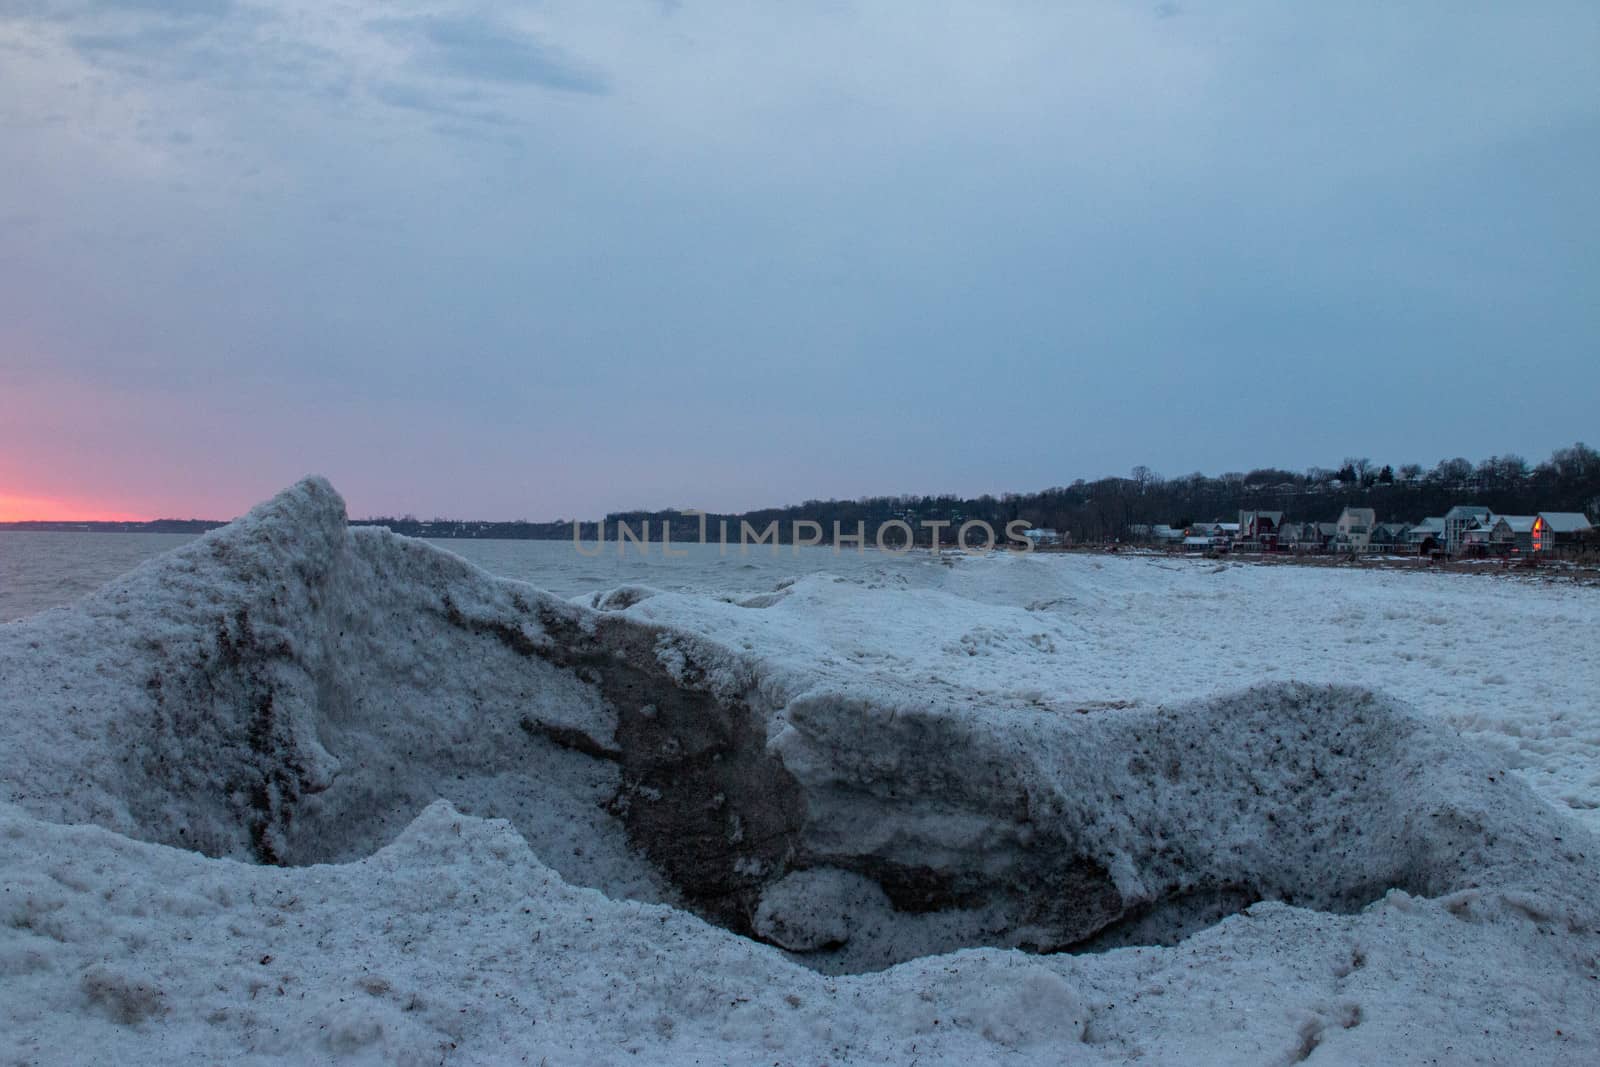 Port stanley beach in winter at sunset. Ontario Canada photograph.